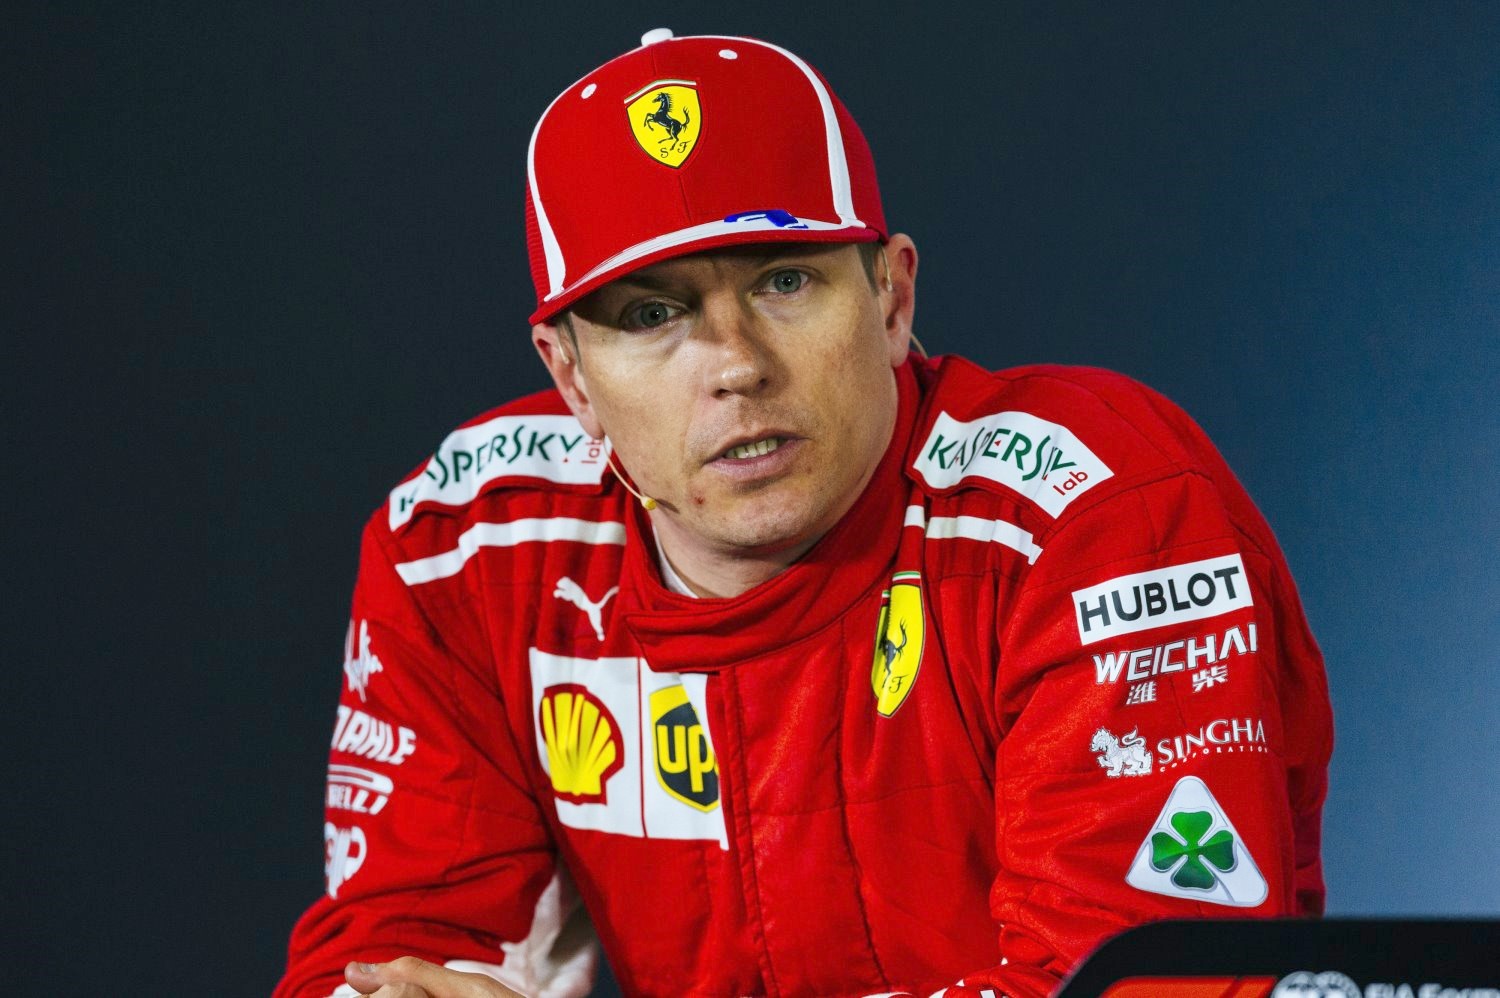 Kimi Raikkonen faced with the same 'fake news' lies the President of the USA has to deal with every day